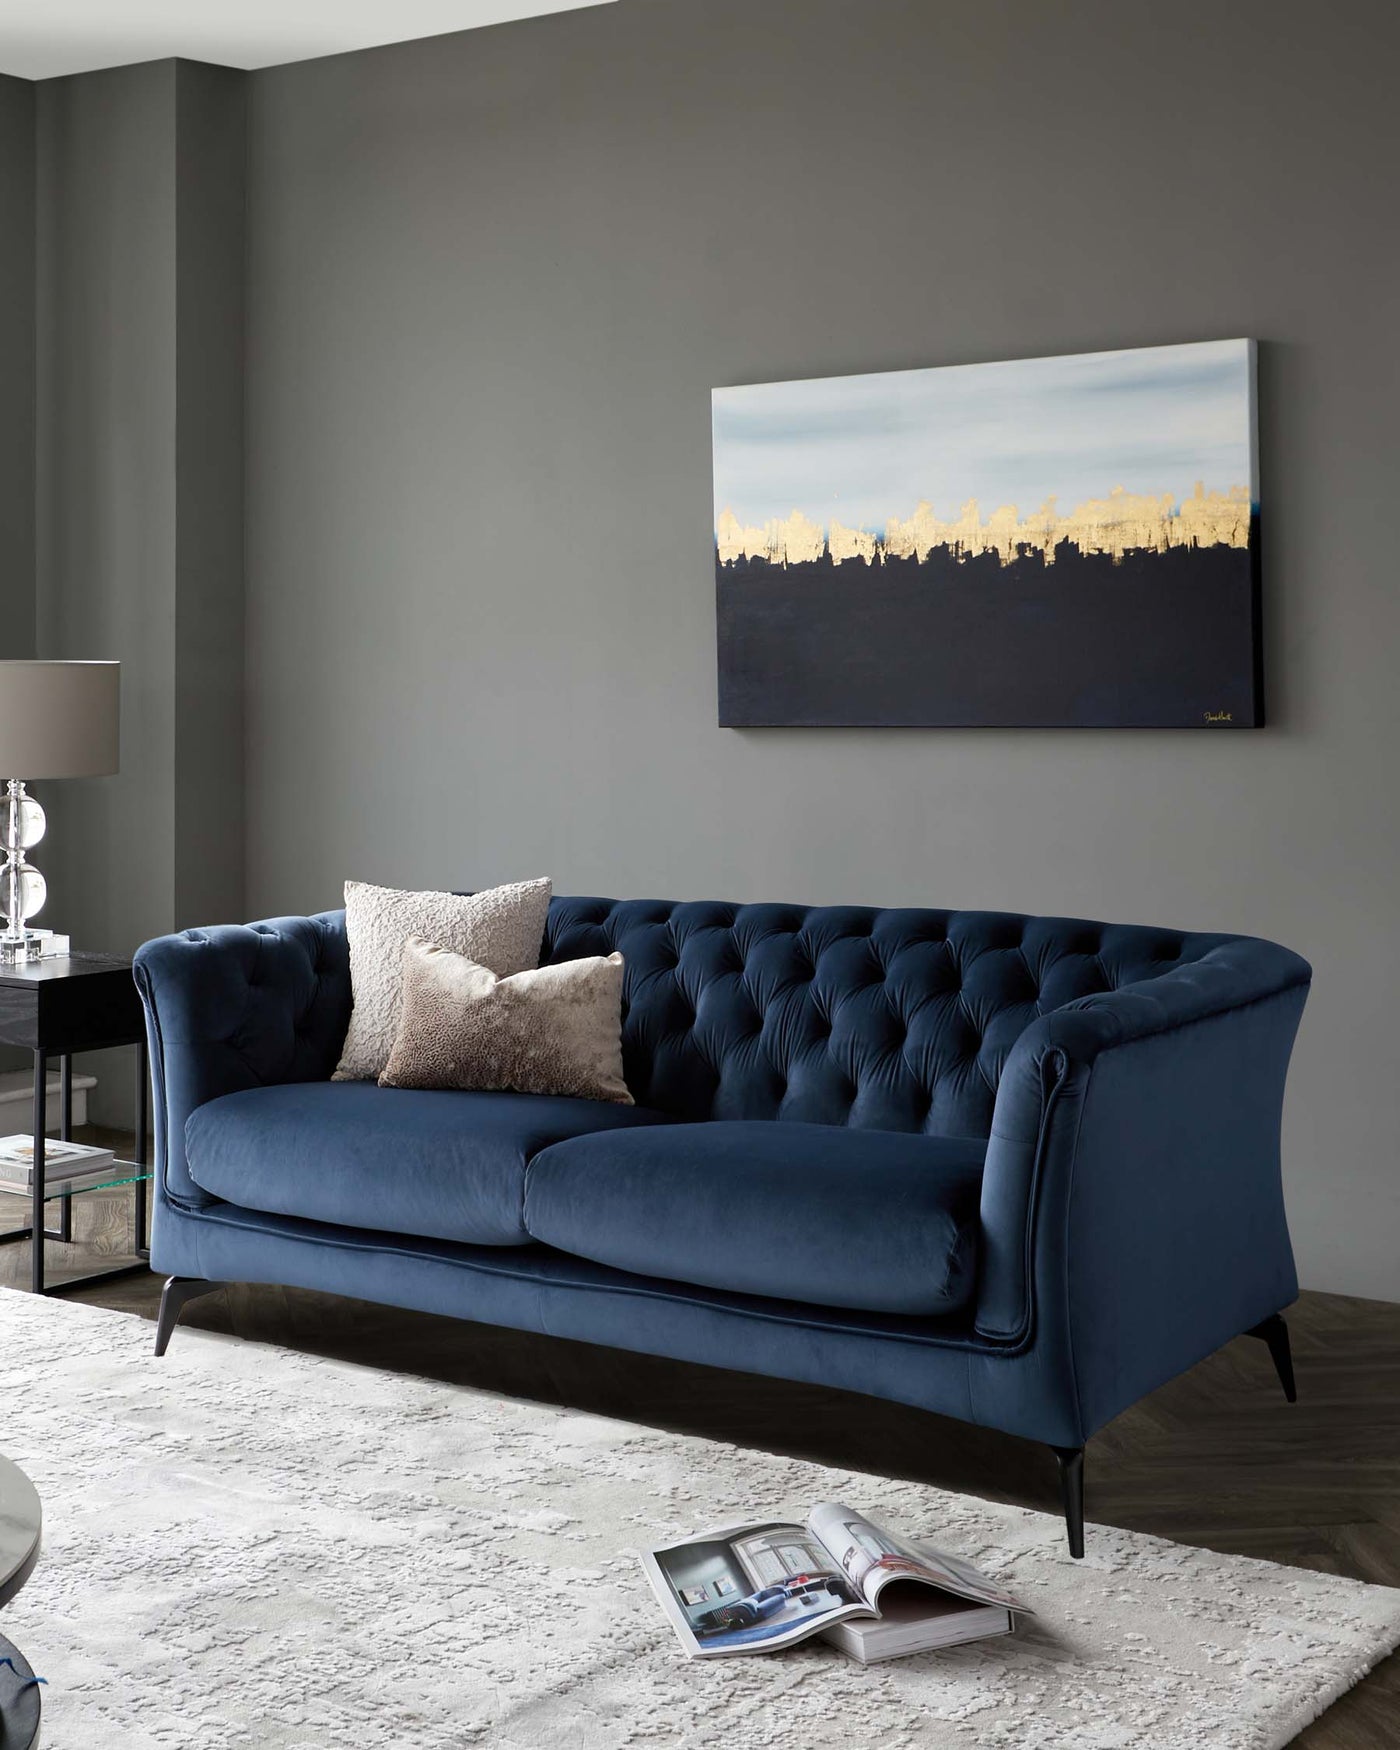 Elegant navy blue velvet tufted sofa with high armrests and black wooden tapered legs, accompanied by a white shaggy area rug on a dark wooden floor, and a clear glass side table with a metallic base holding a modern table lamp.